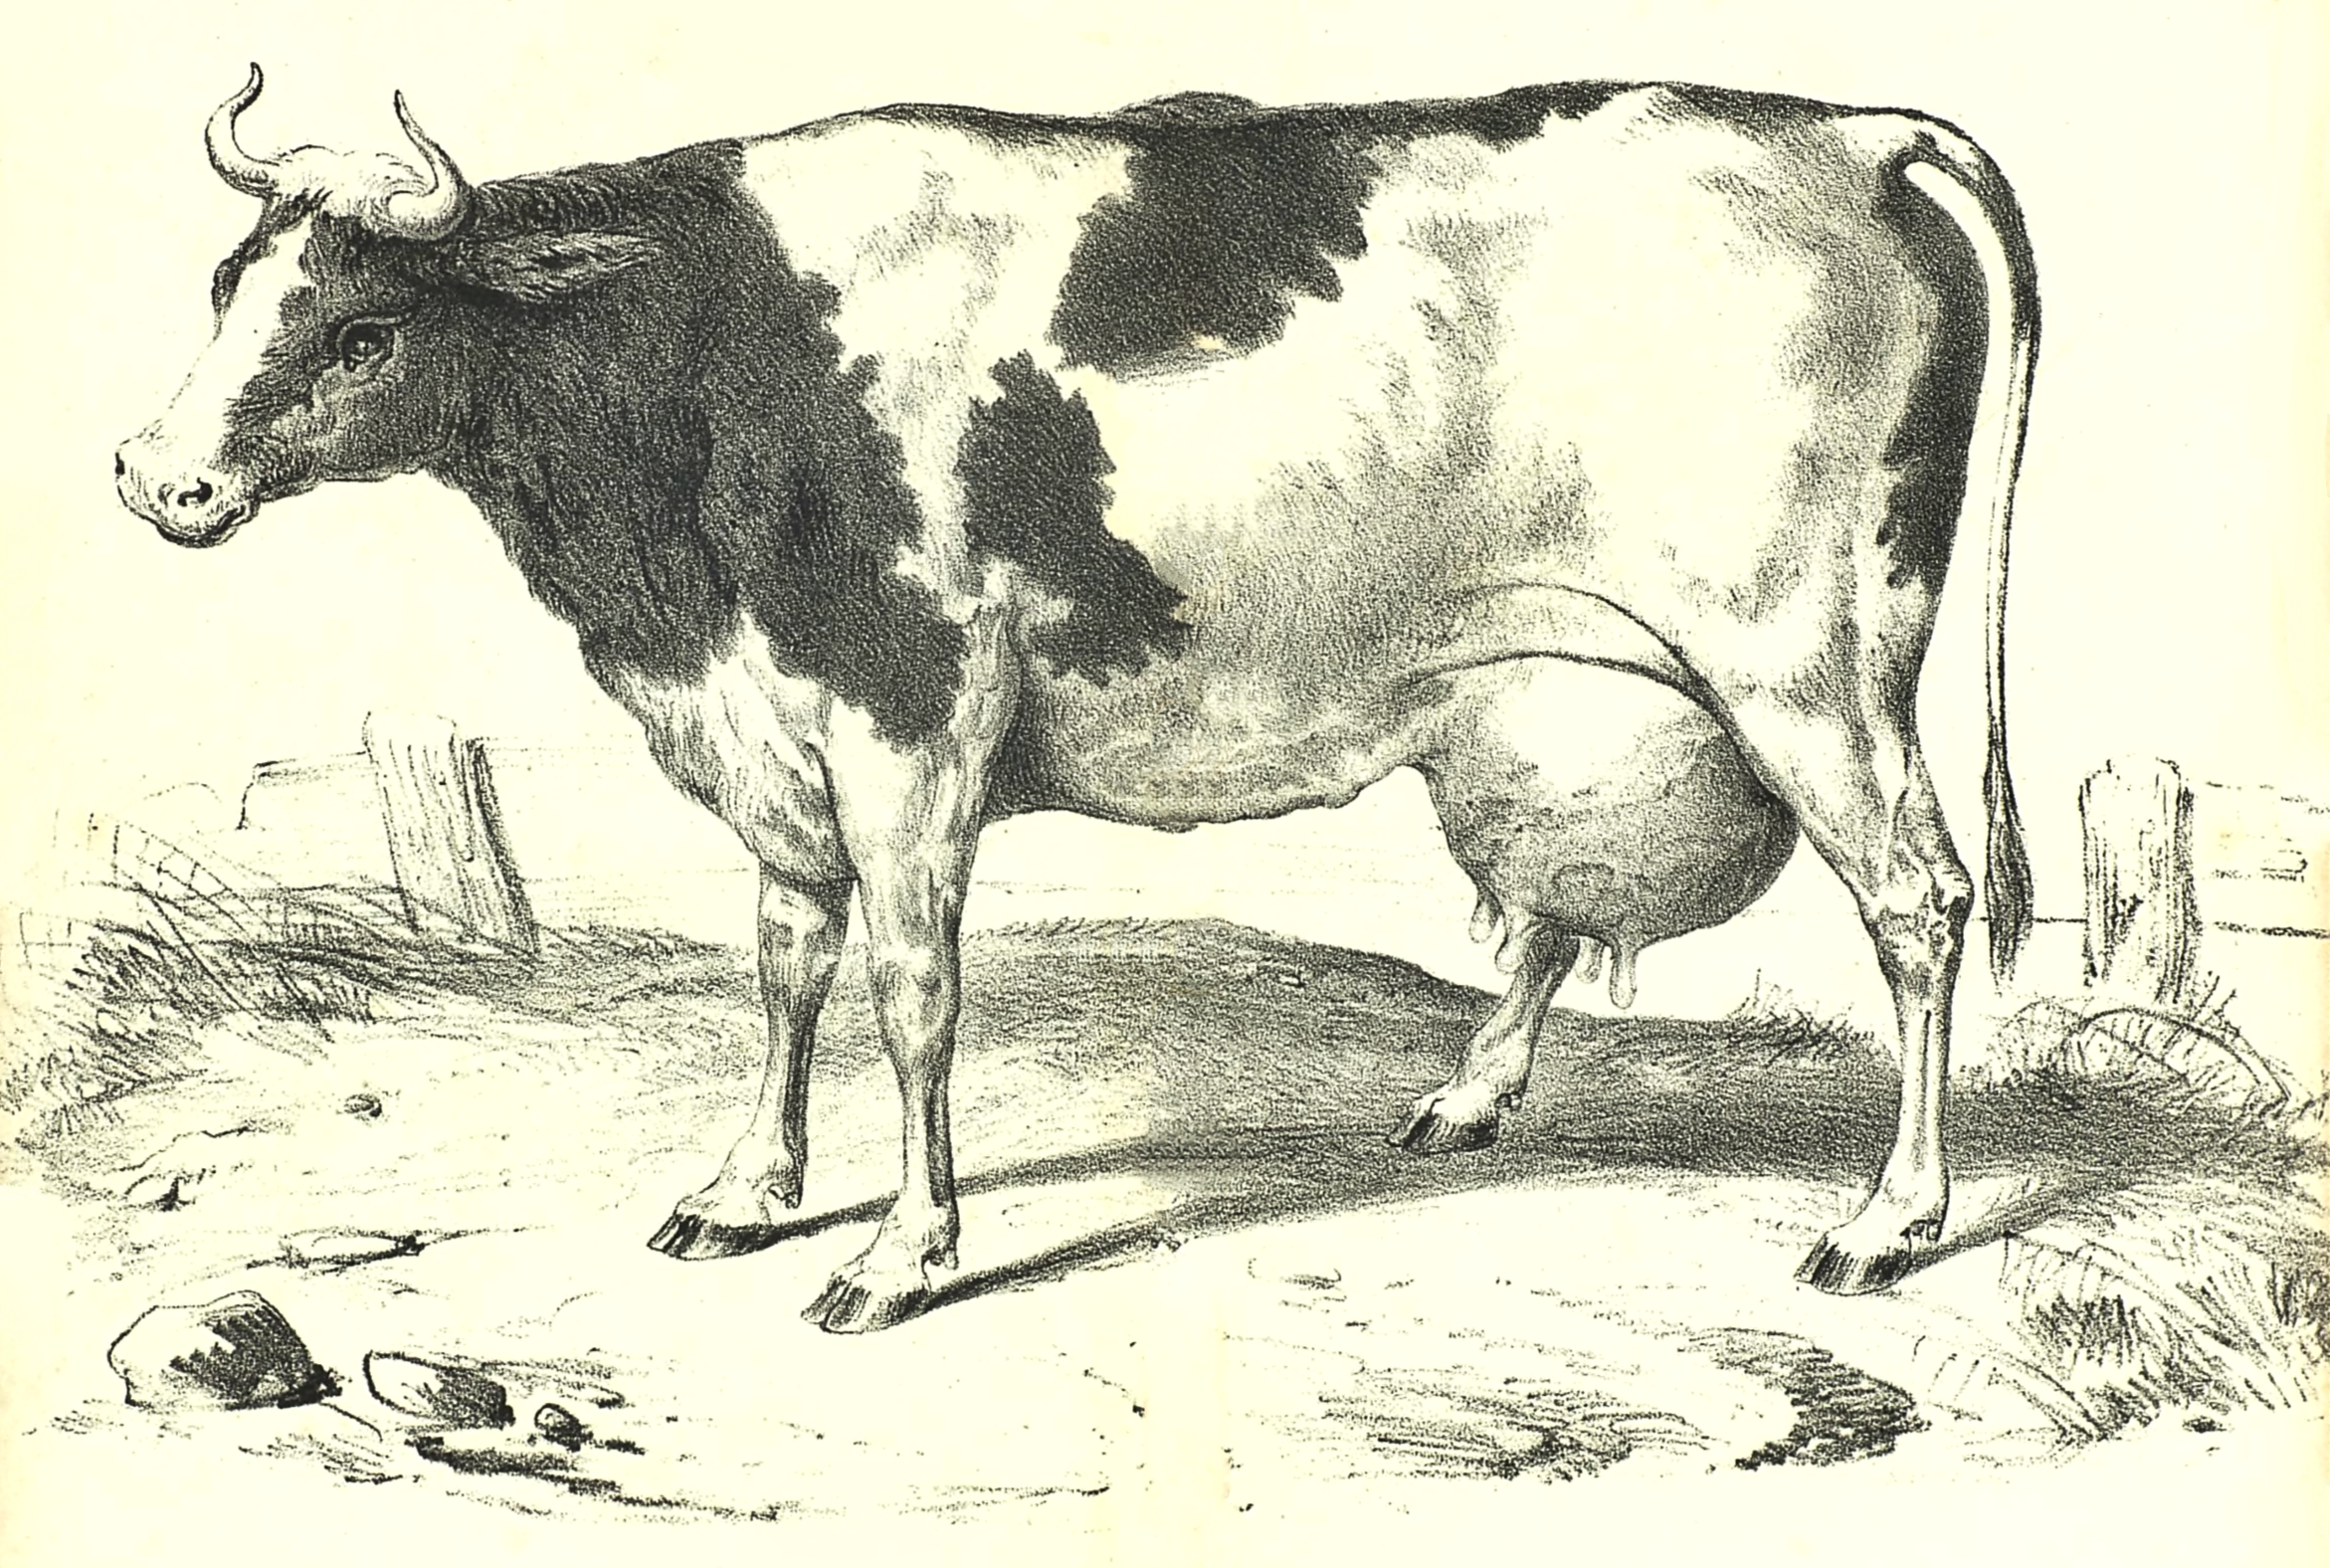 Sweet Vintage Milk Cow Drawing From 1857 And Shared By Reusable Art.